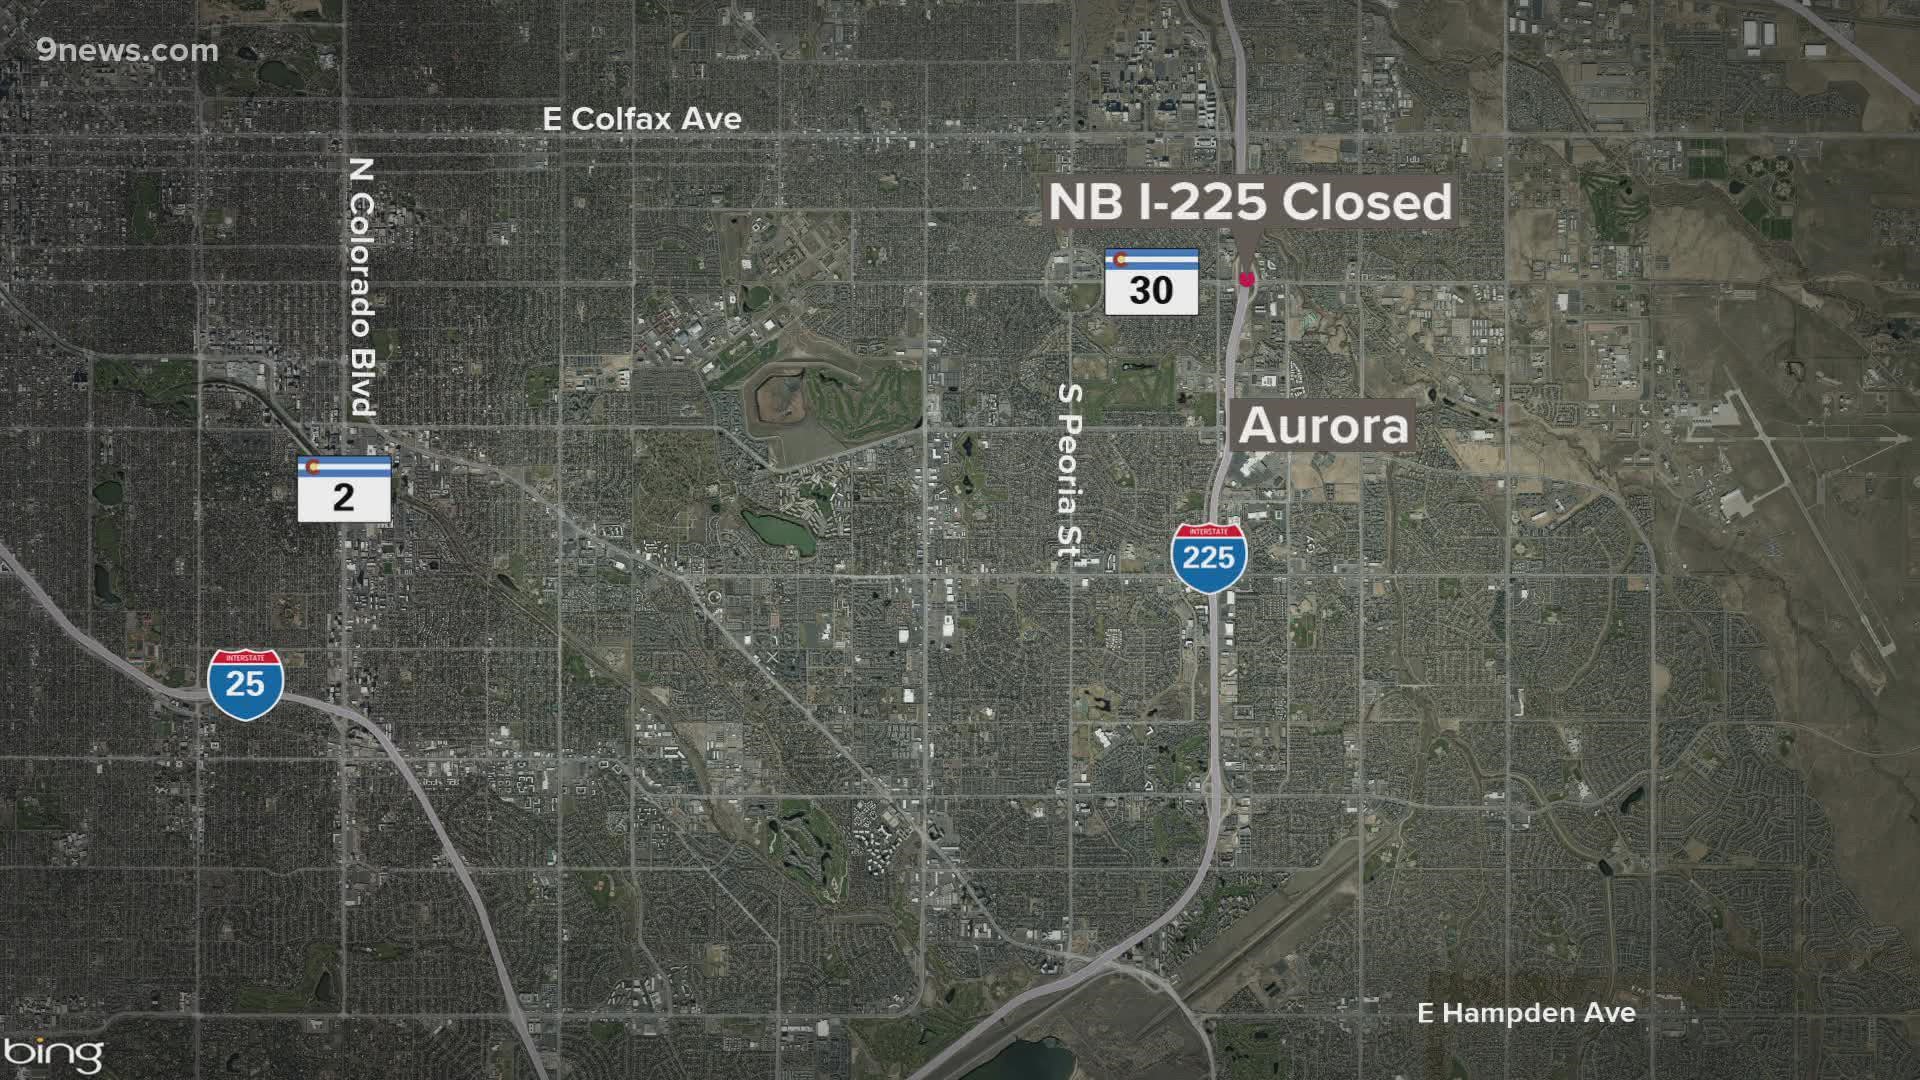 A serious injury crash Sunday night caused an hours-long closure on northbound I-225 at 6th Avenue in Aurora.